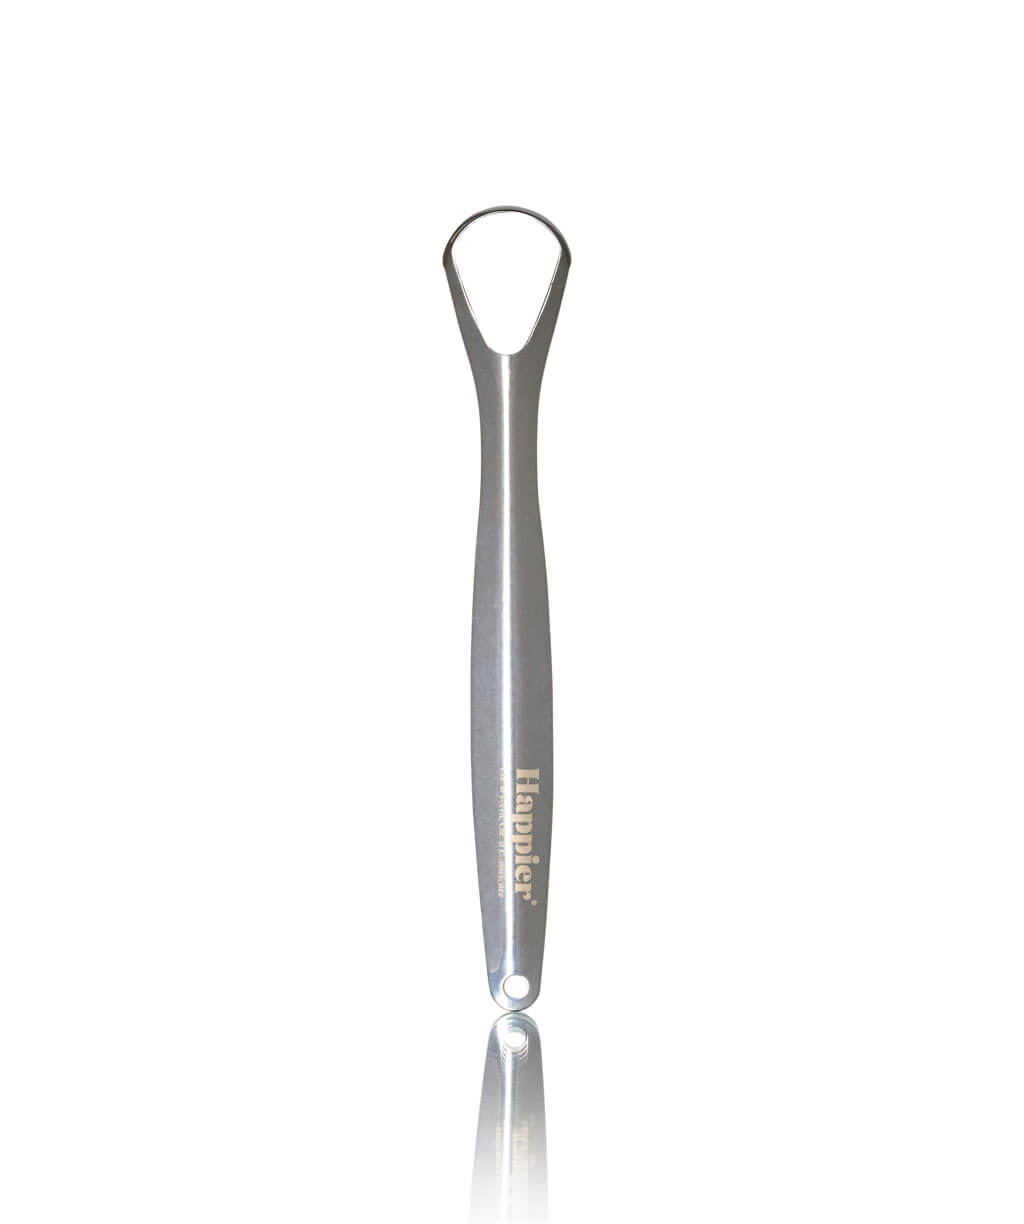 Happier Stainless Steel Tongue Cleaner